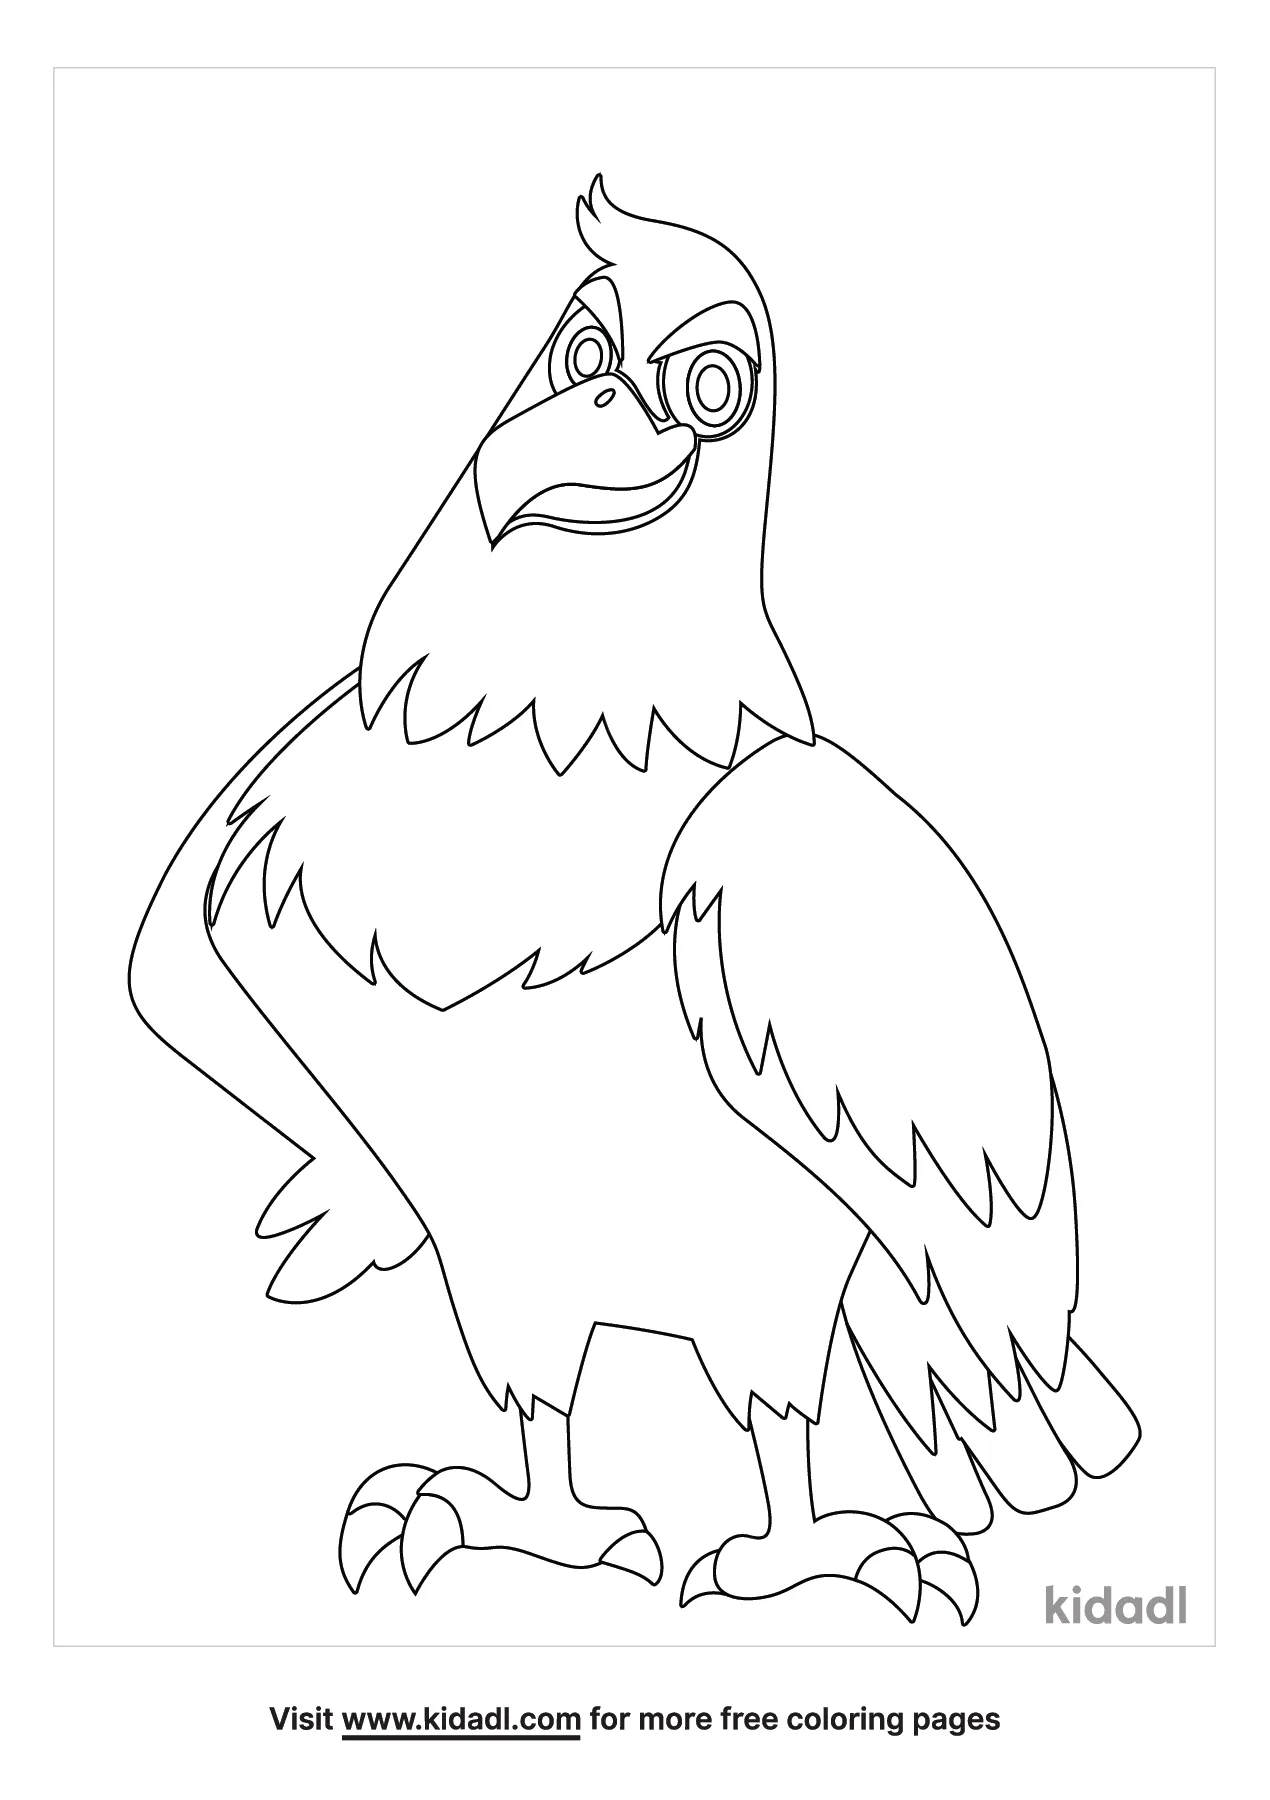 Free Harpy Eagle Coloring Page | Coloring Page Printables | Kidadl